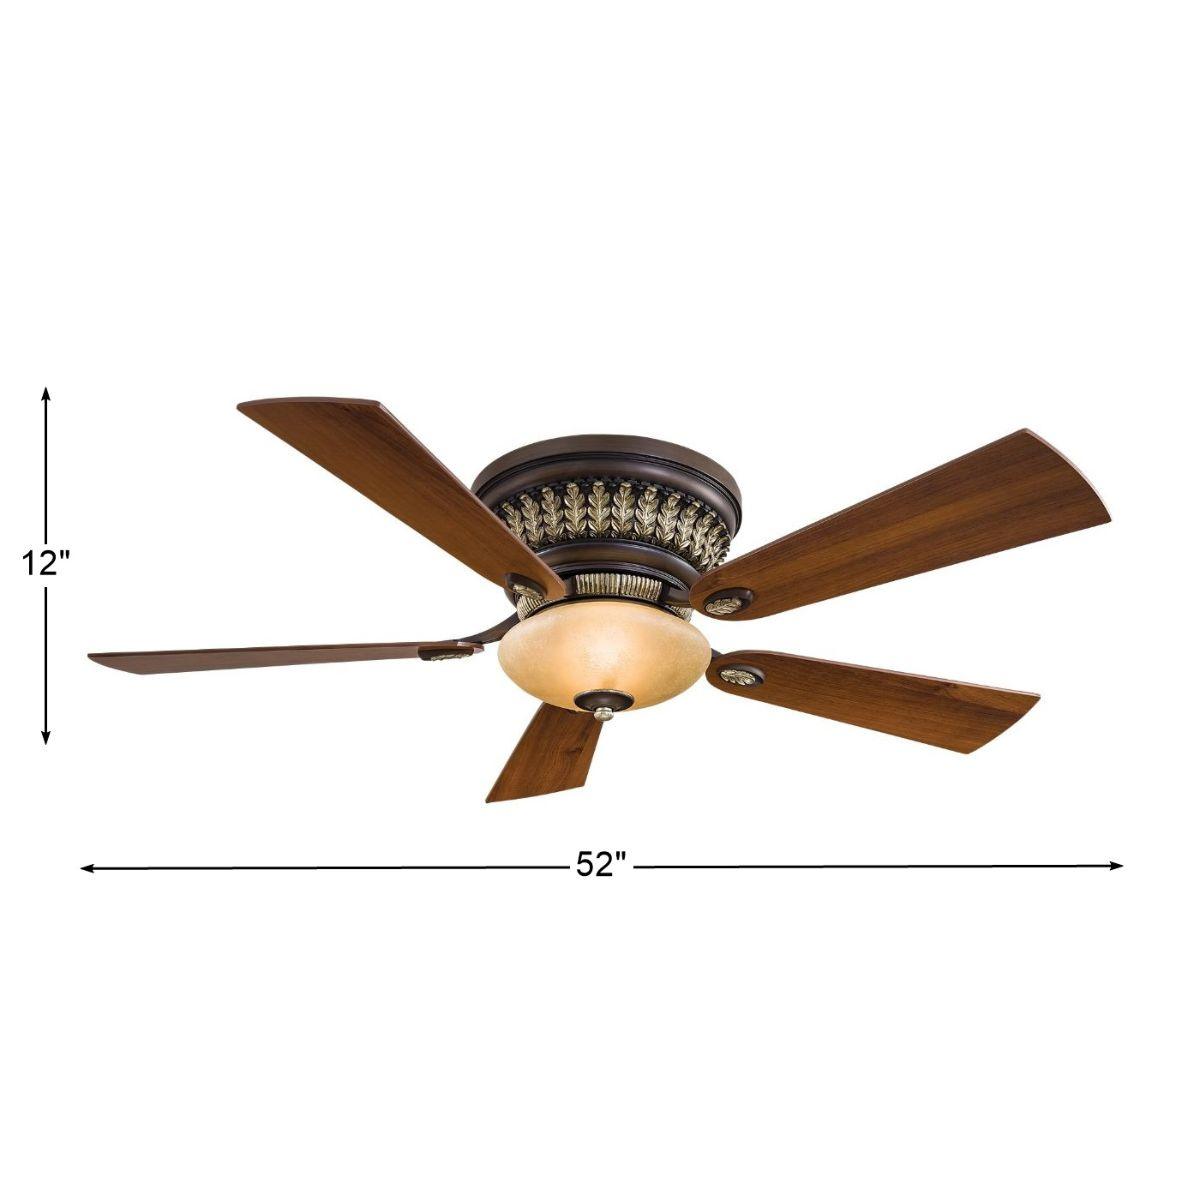 Calais 52 Inch Ceiling Fan With Light And Remote, Belcaro Walnut Finish